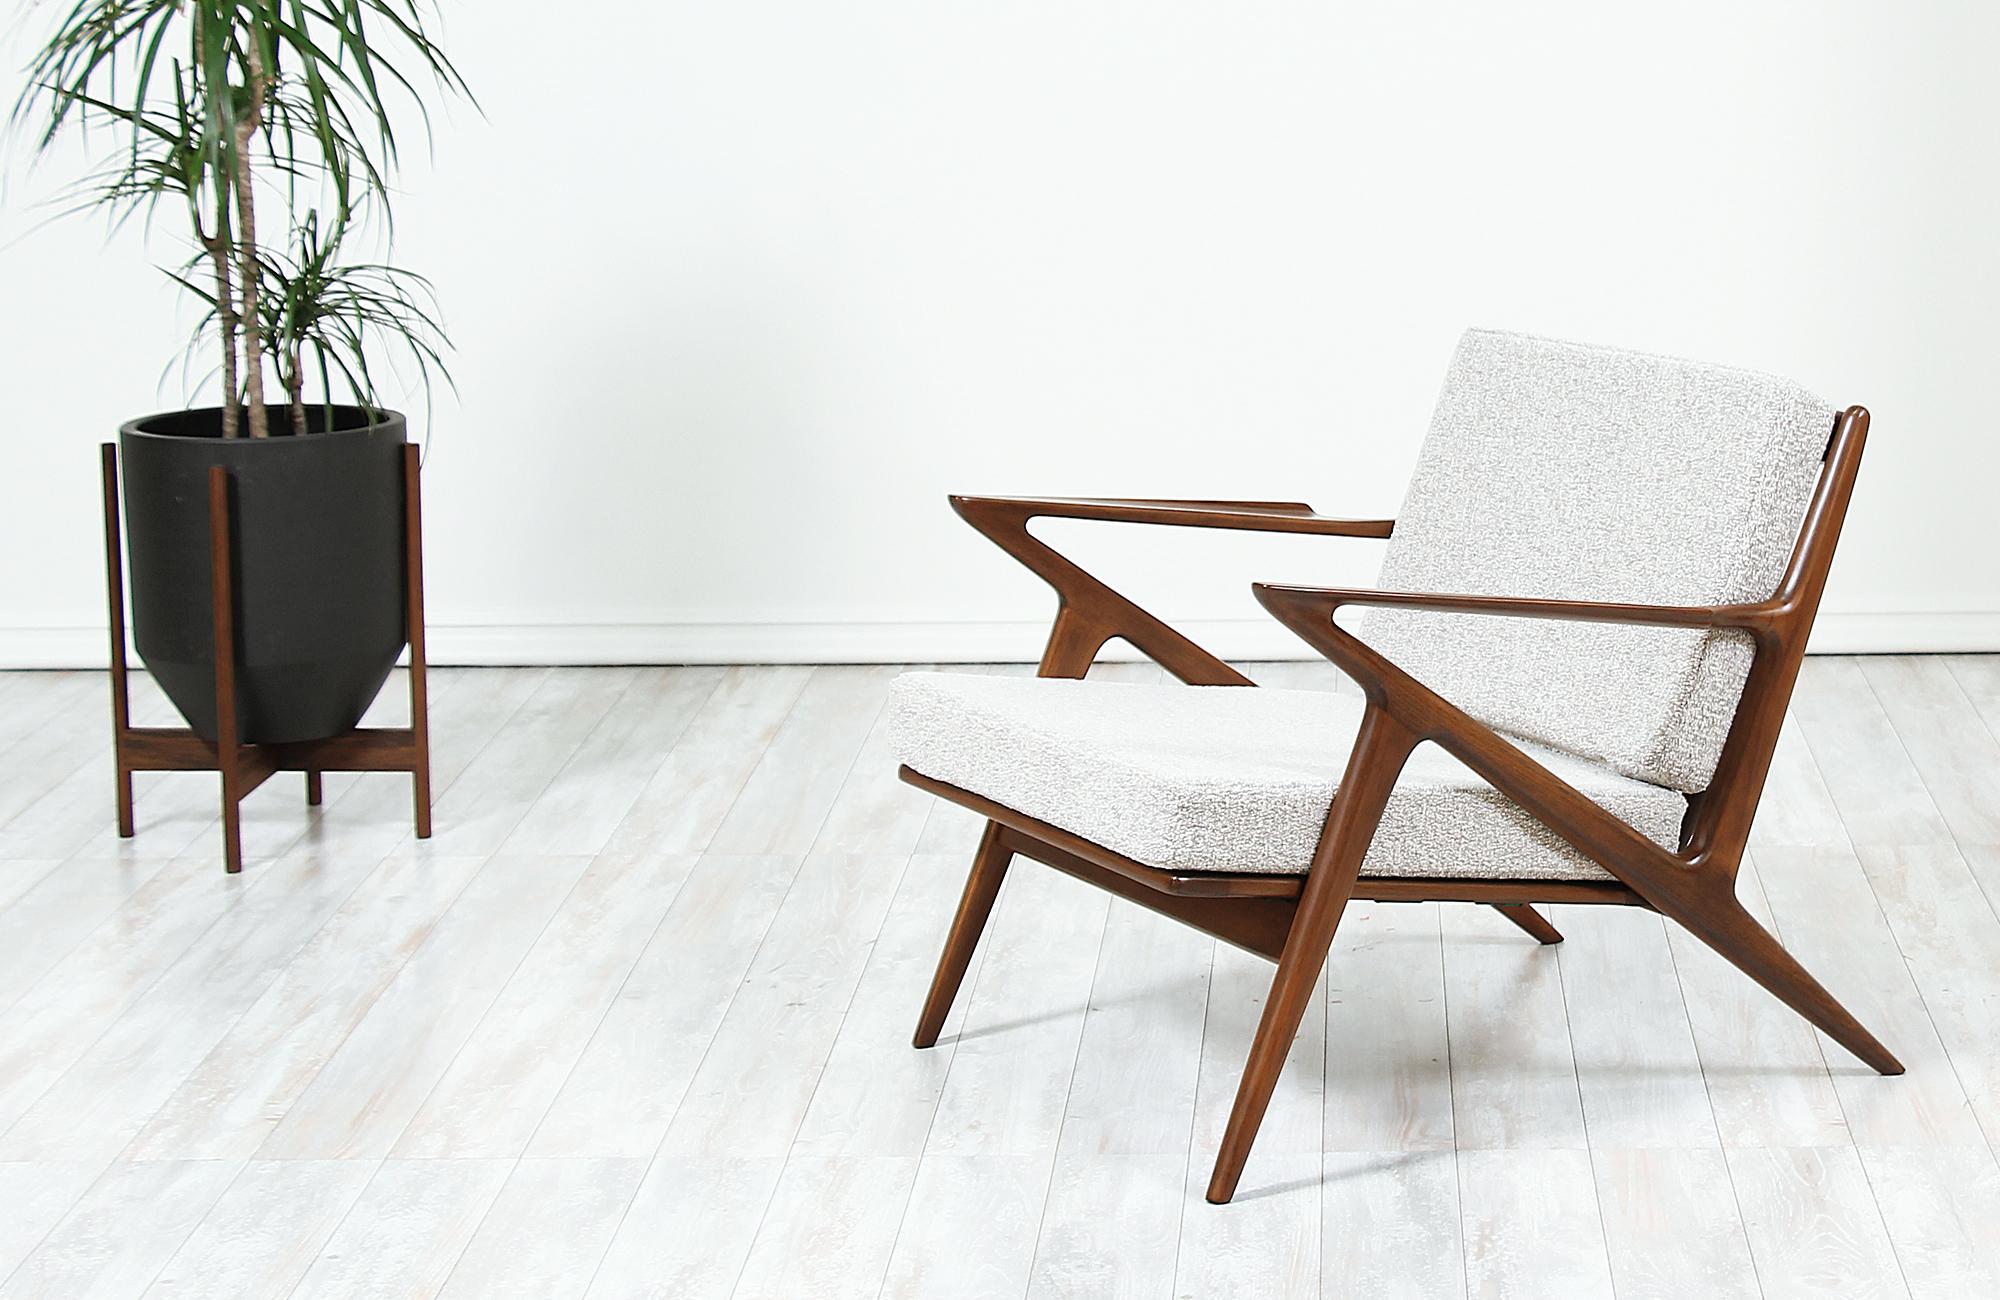 A Classic lounge chair designed by Poul Jensen for Selig in Denmark, circa 1960s. Known as the 'Z' lounge chair for its signature armrests that connect to the legs, which resembles the letter. This iconic chair features a solid walnut-stained